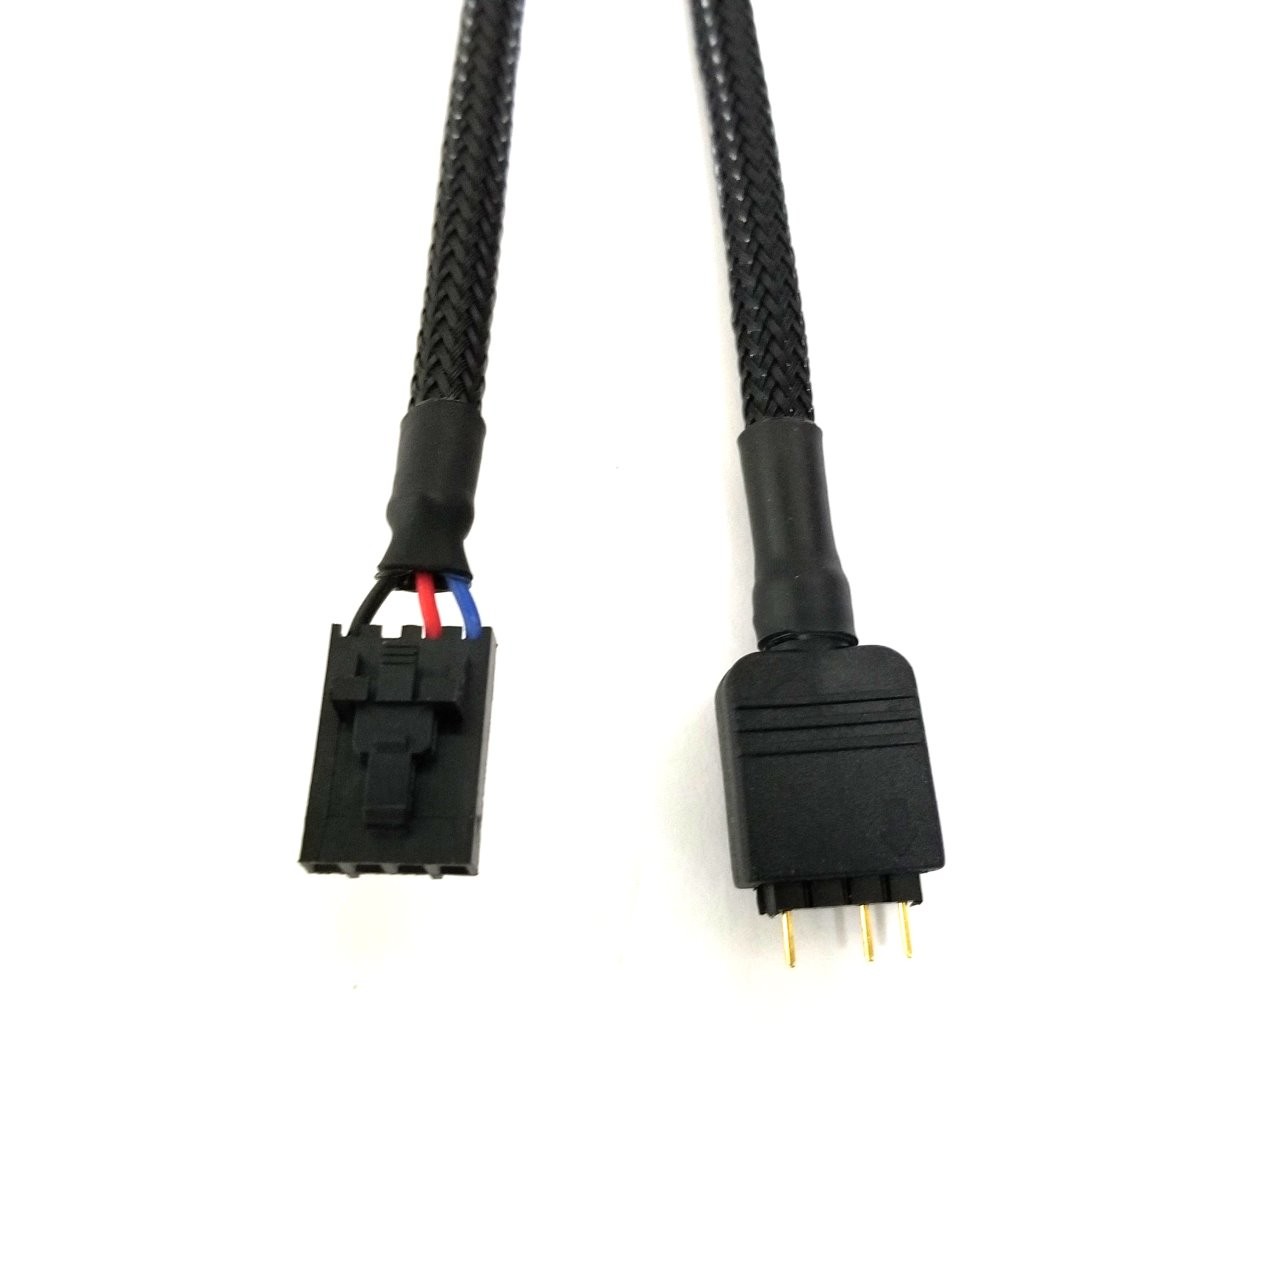 Corsair LED RGB 4 Pin to 5v RGB 3 Pin Male Connector Adapter Cable